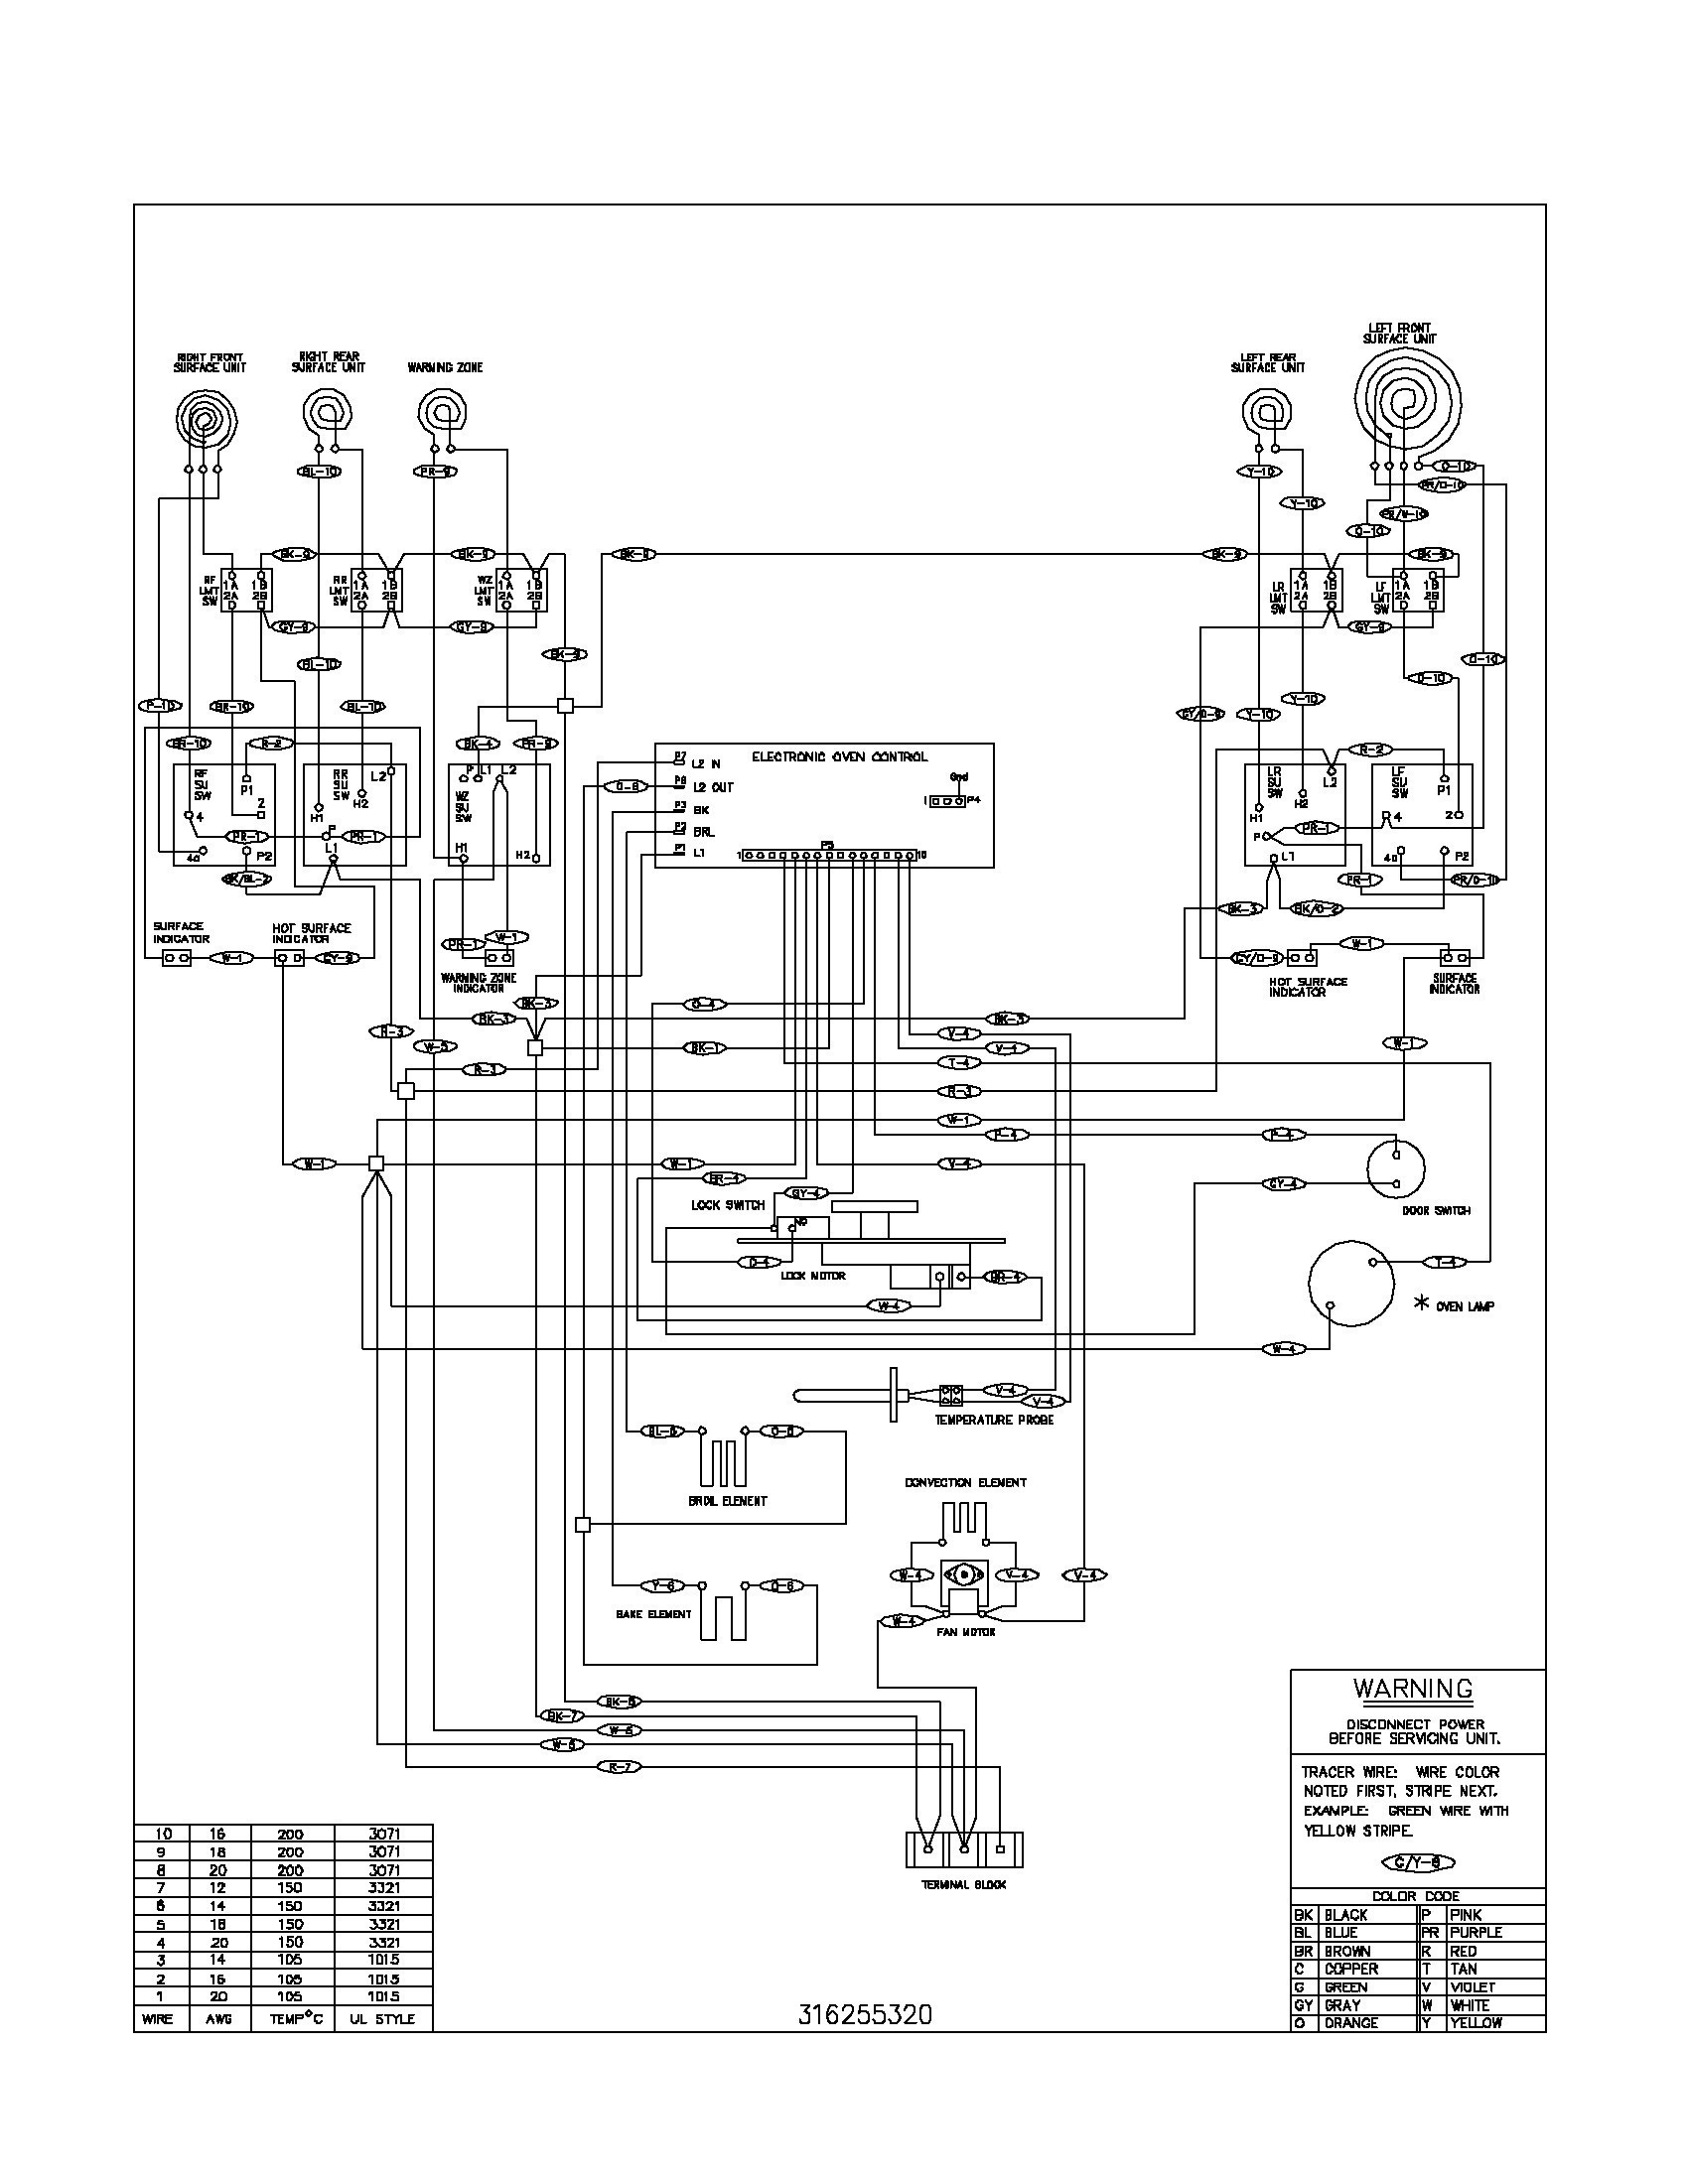 Wiring Diagram For Electric Stove Valid Electric Stove Wiring